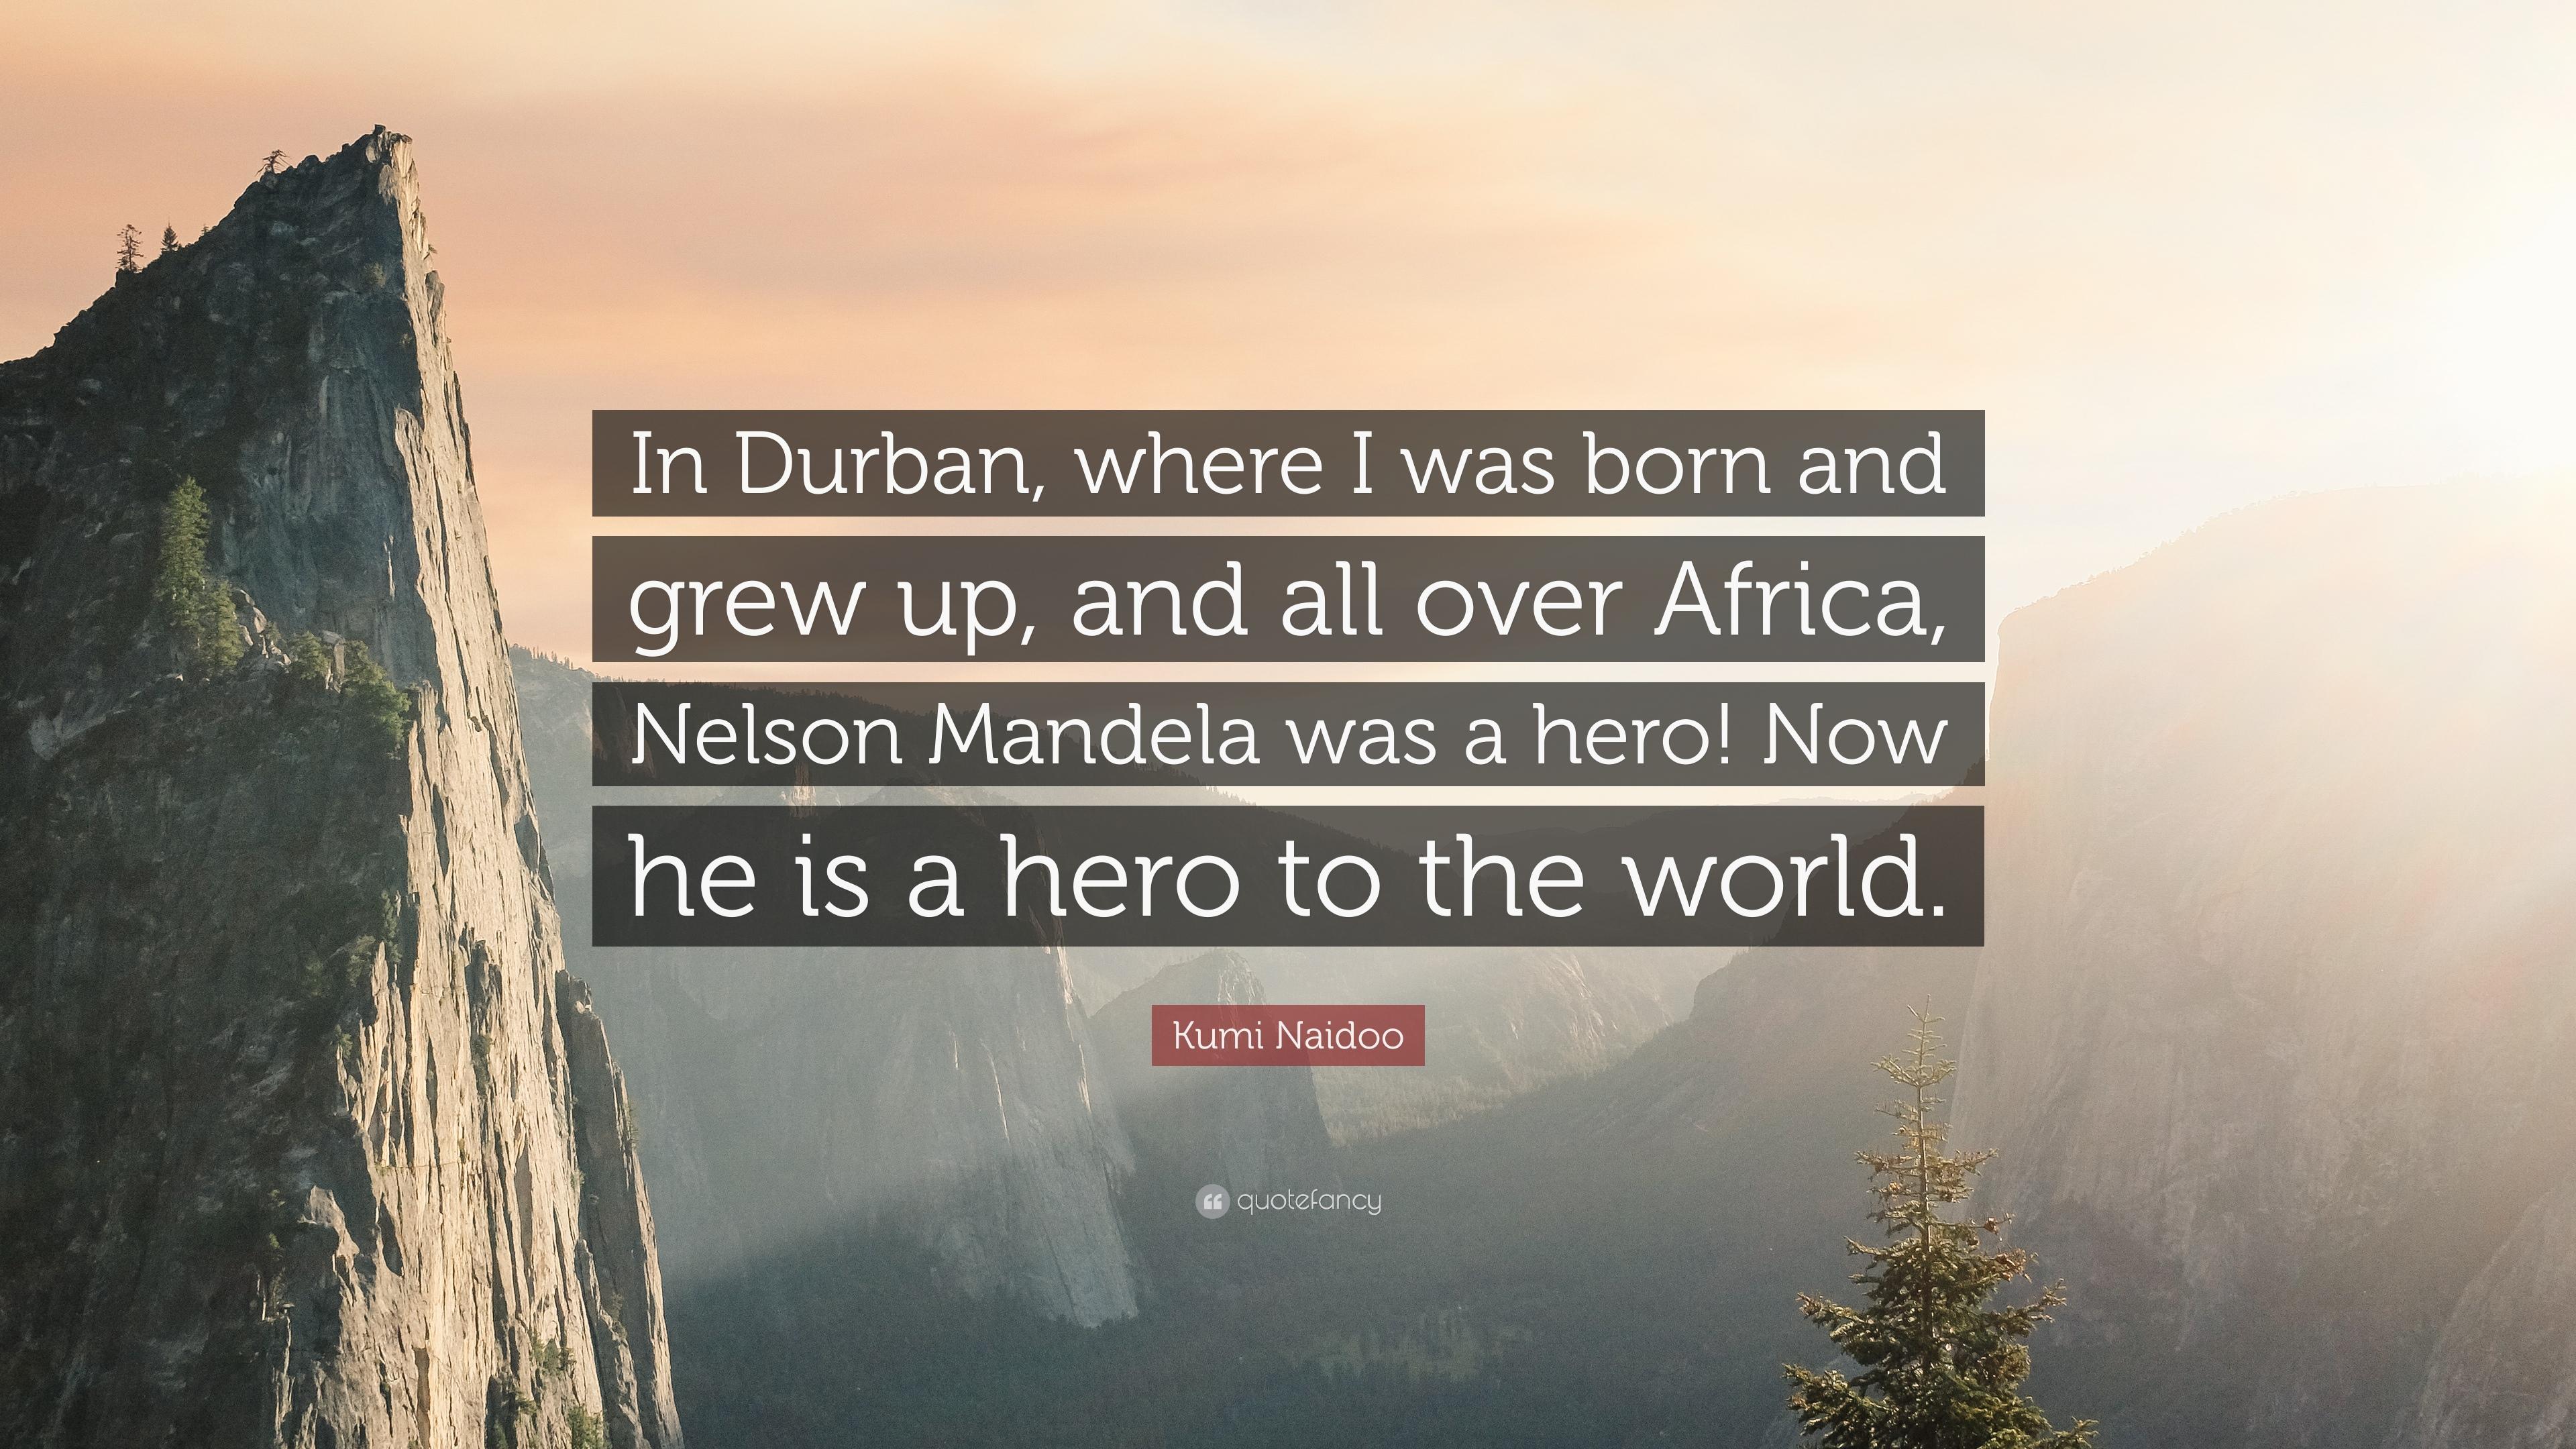 Kumi Naidoo Quote: “In Durban, where I was born and grew up, and all